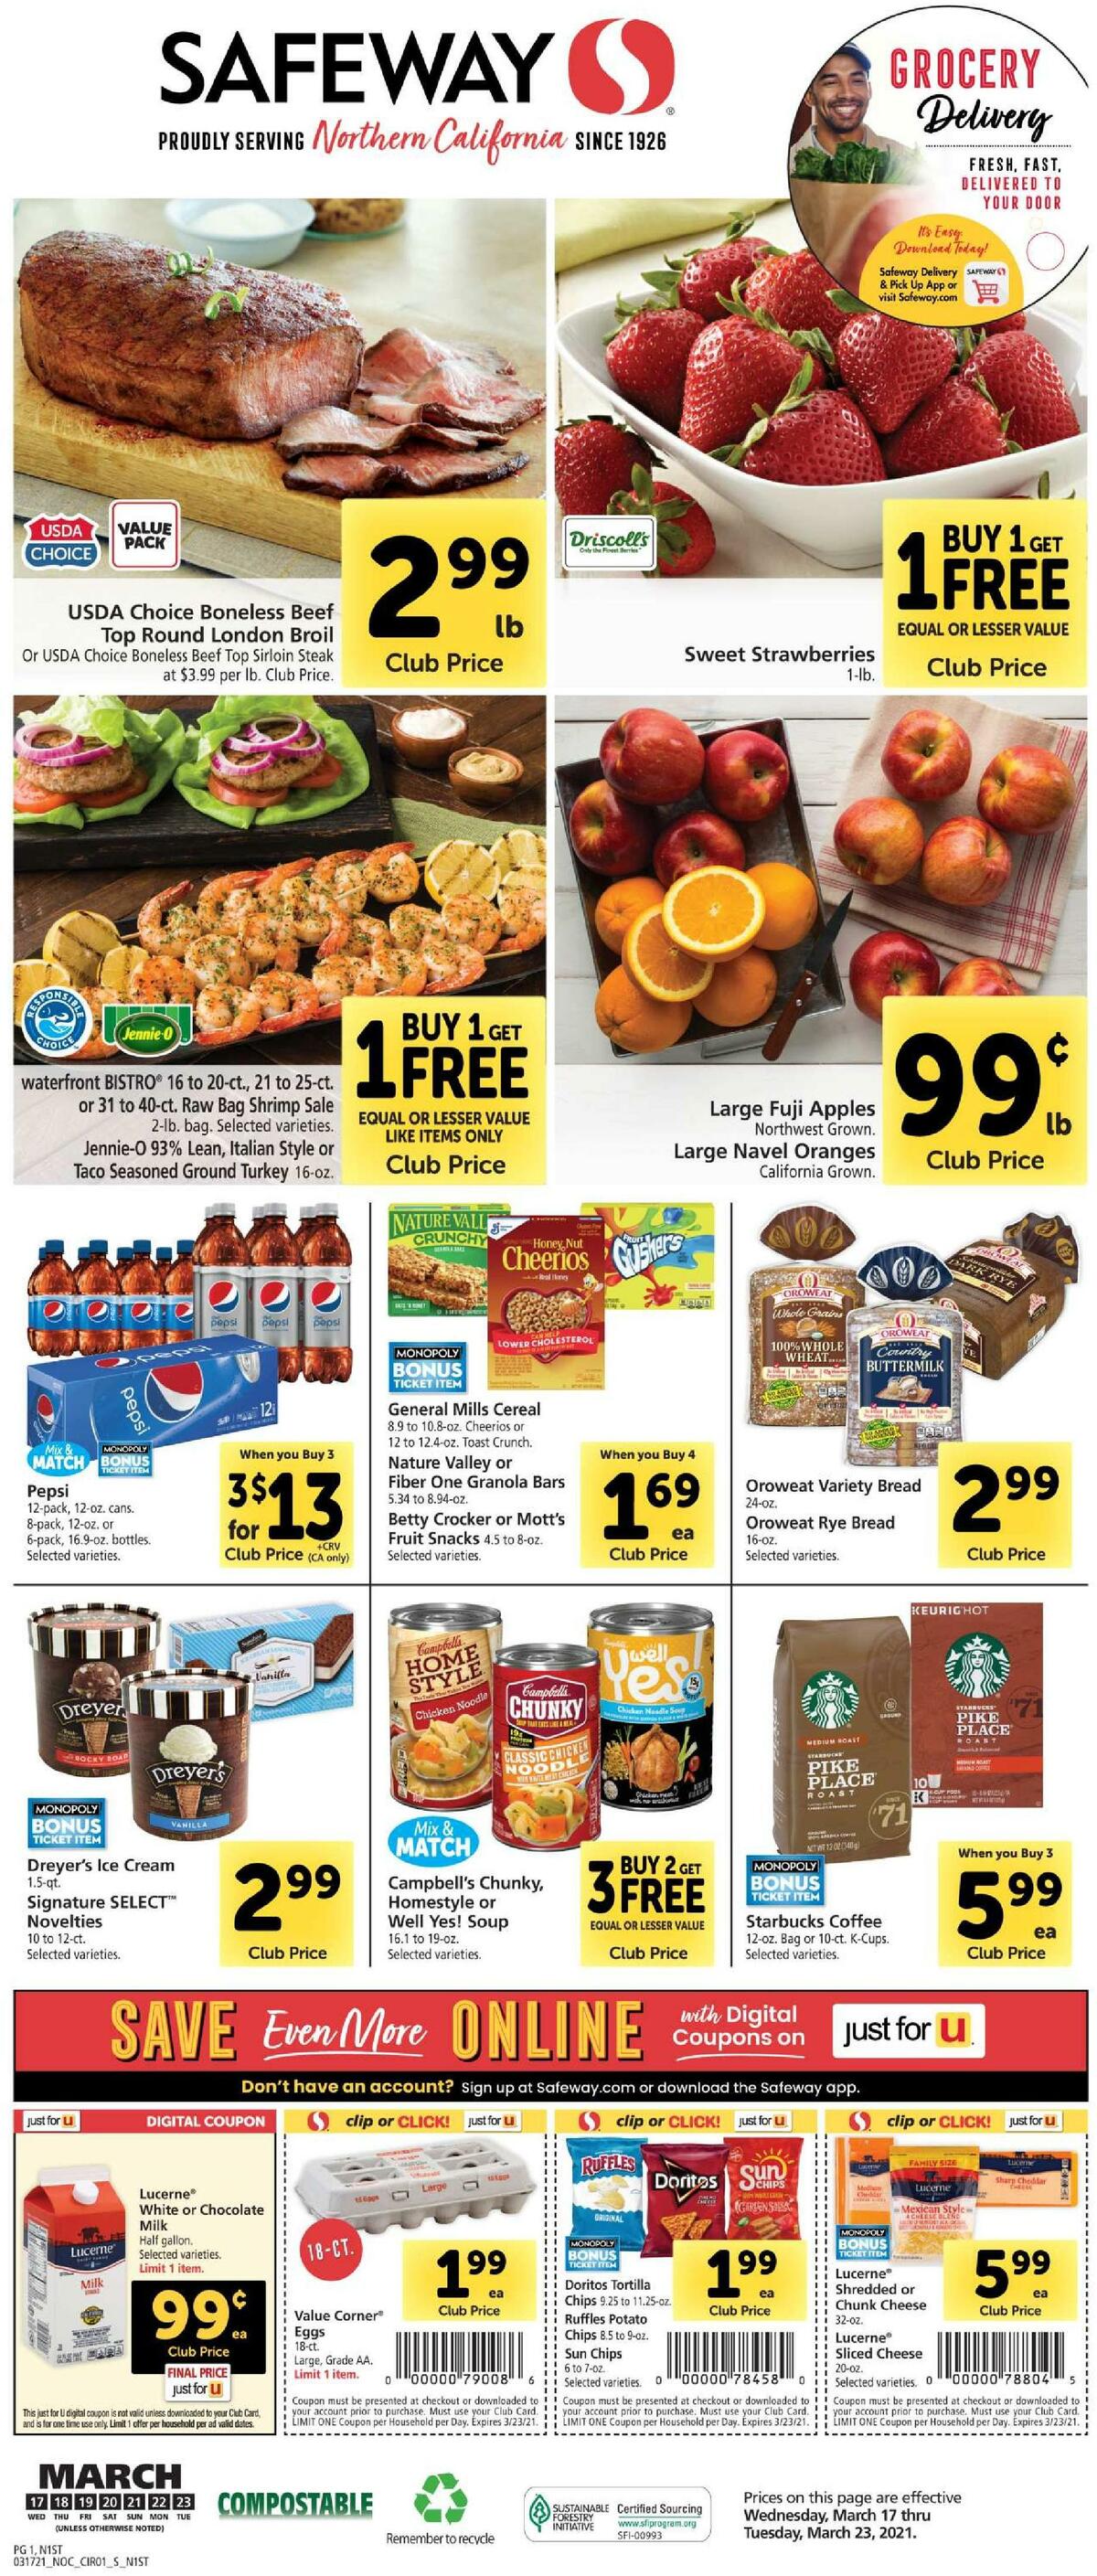 Safeway Weekly Ads & Special Buys from March 17